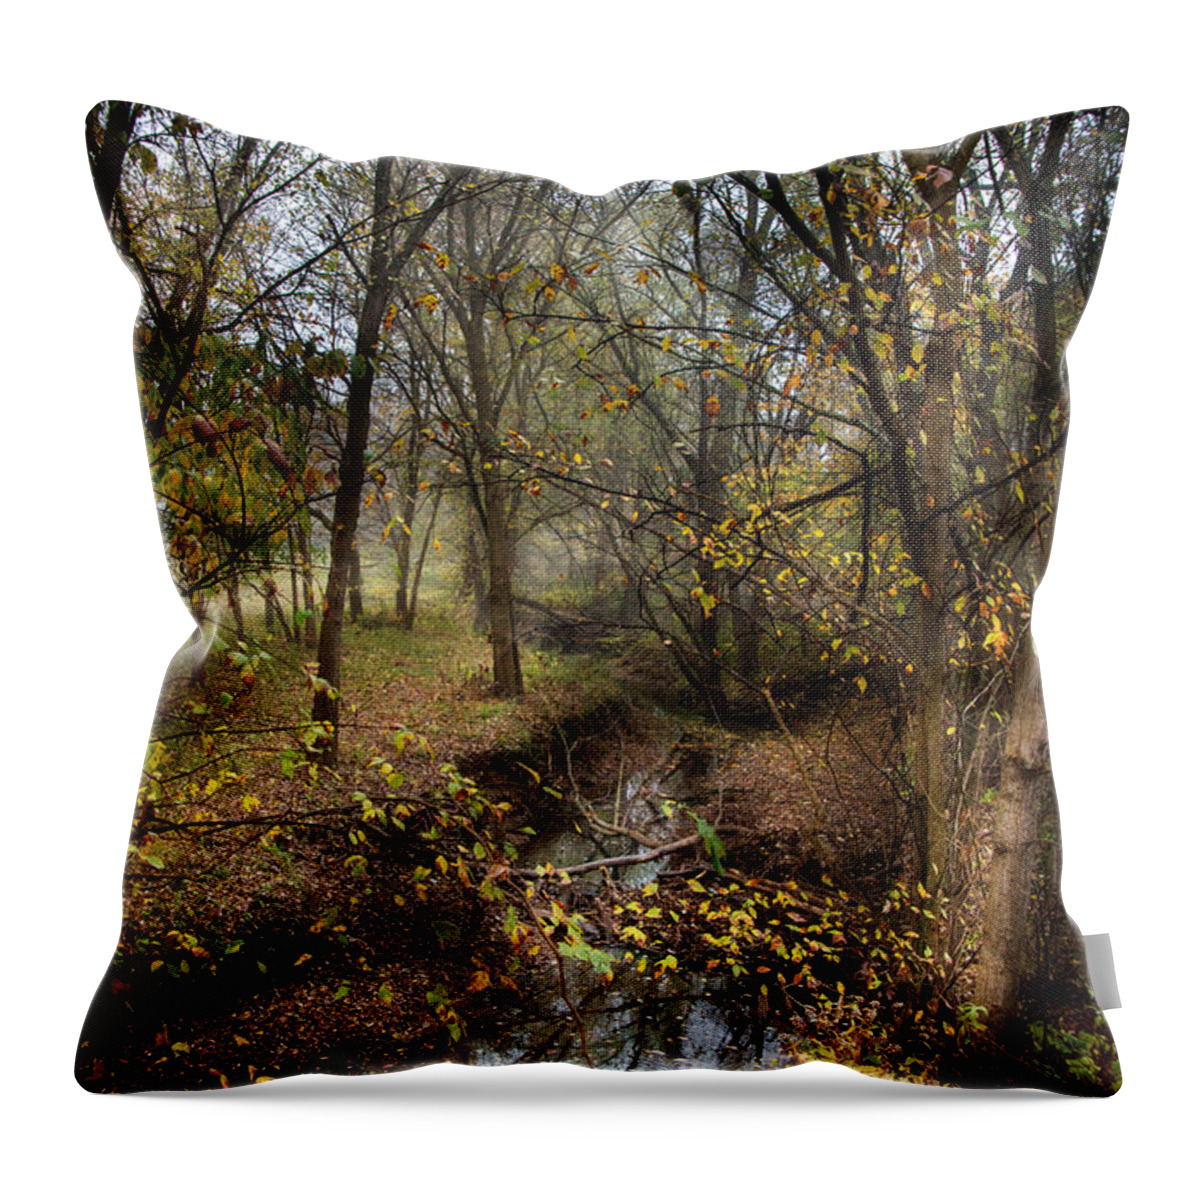 From Snow That Melted Only Yesterday Throw Pillow featuring the photograph From Snow That Melted Only Yesterday by William Fields